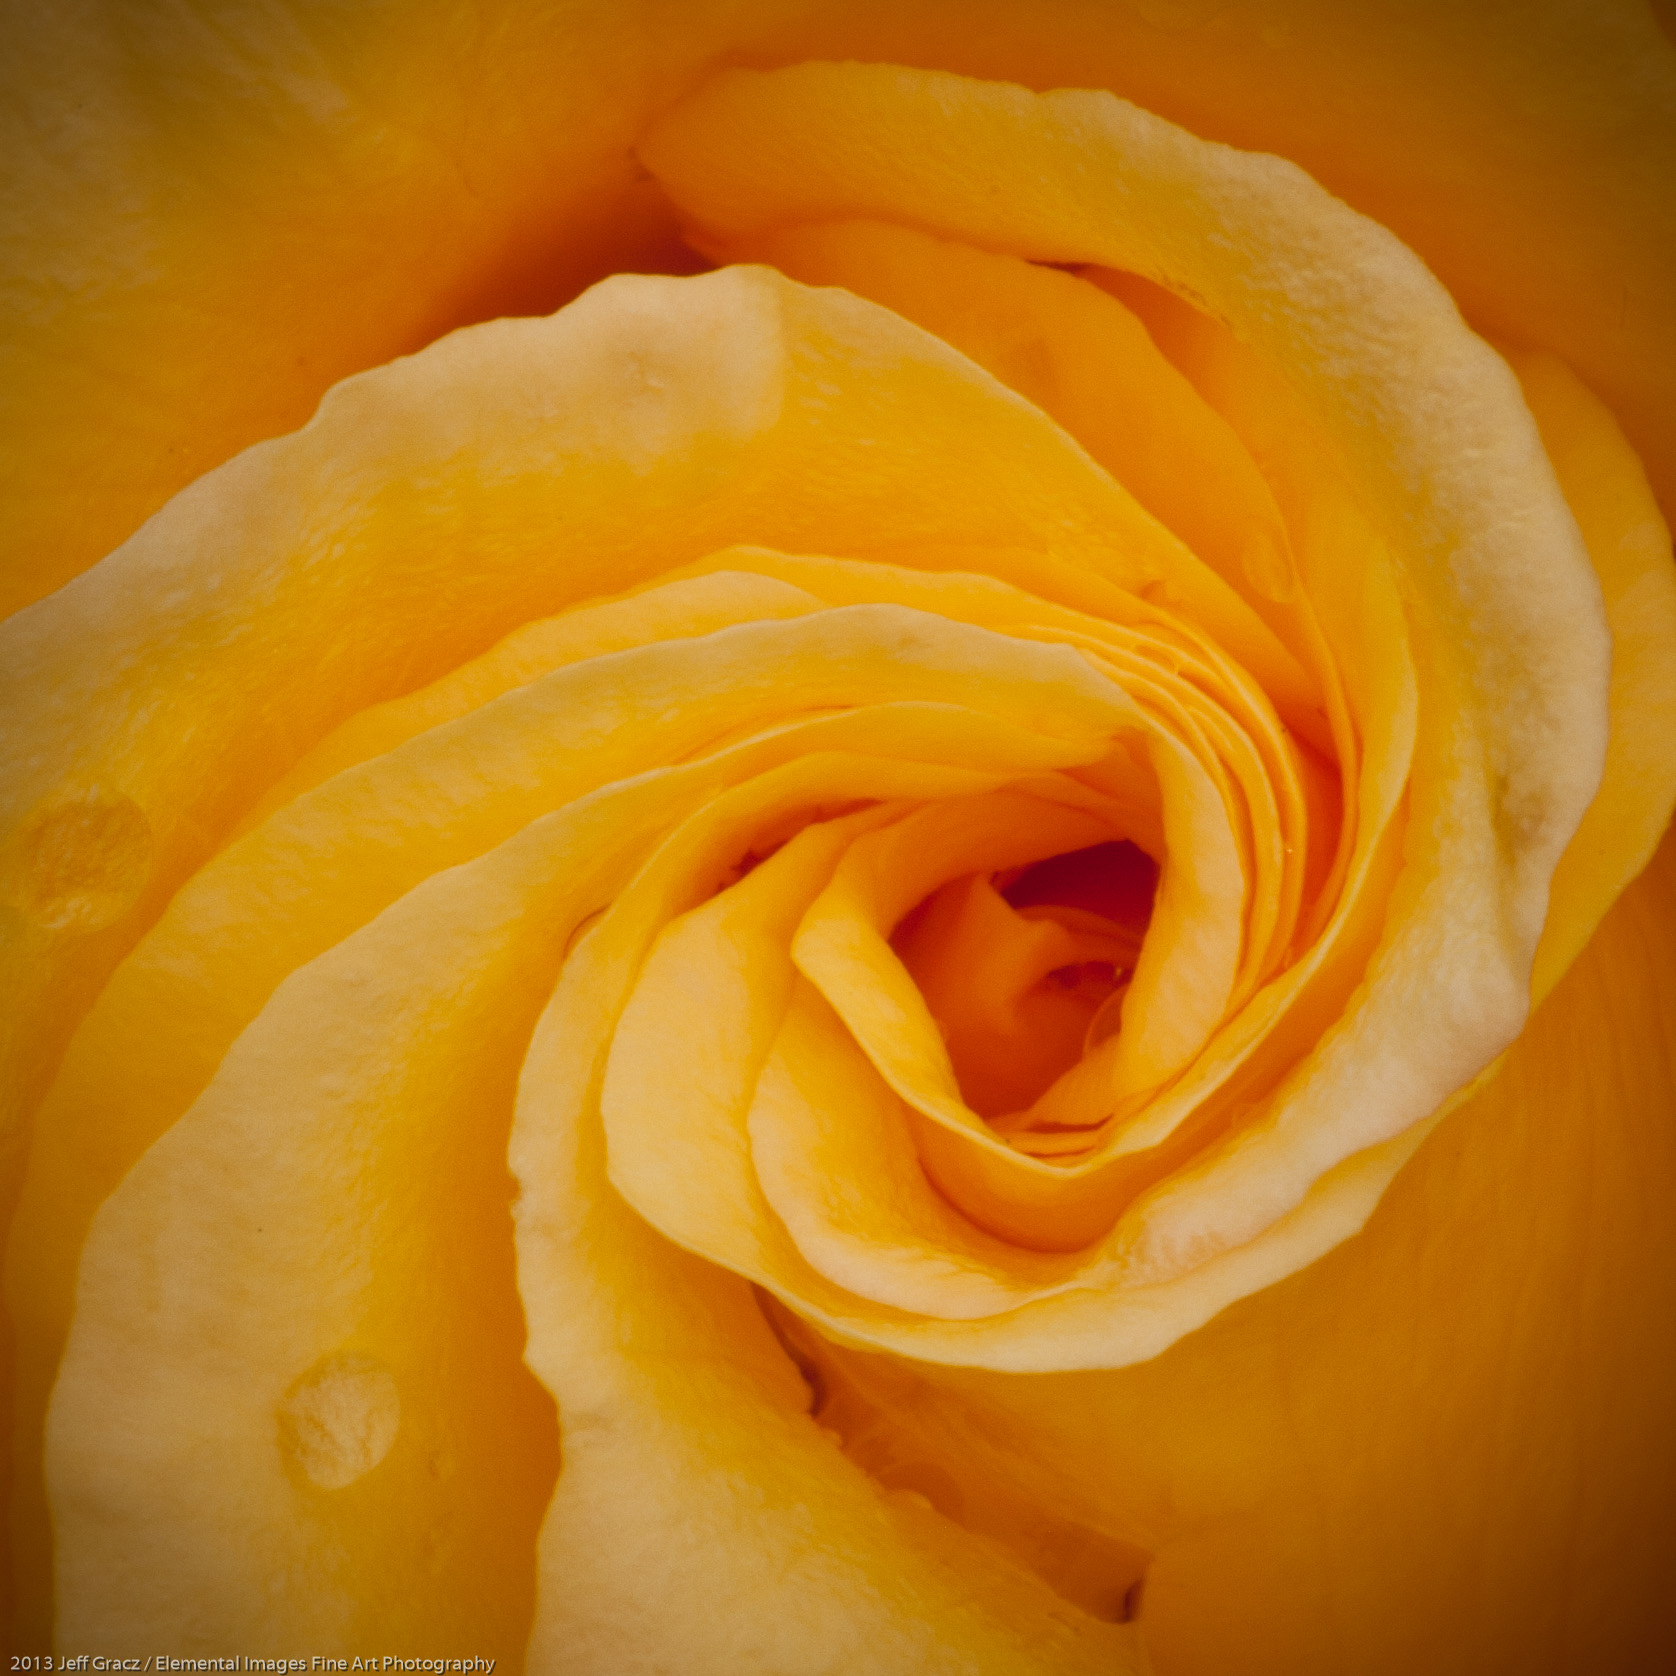 Roses LII | Portland | OR | USA - © 2013 Jeff Gracz / Elemental Images Fine Art Photography - All Rights Reserved Worldwide